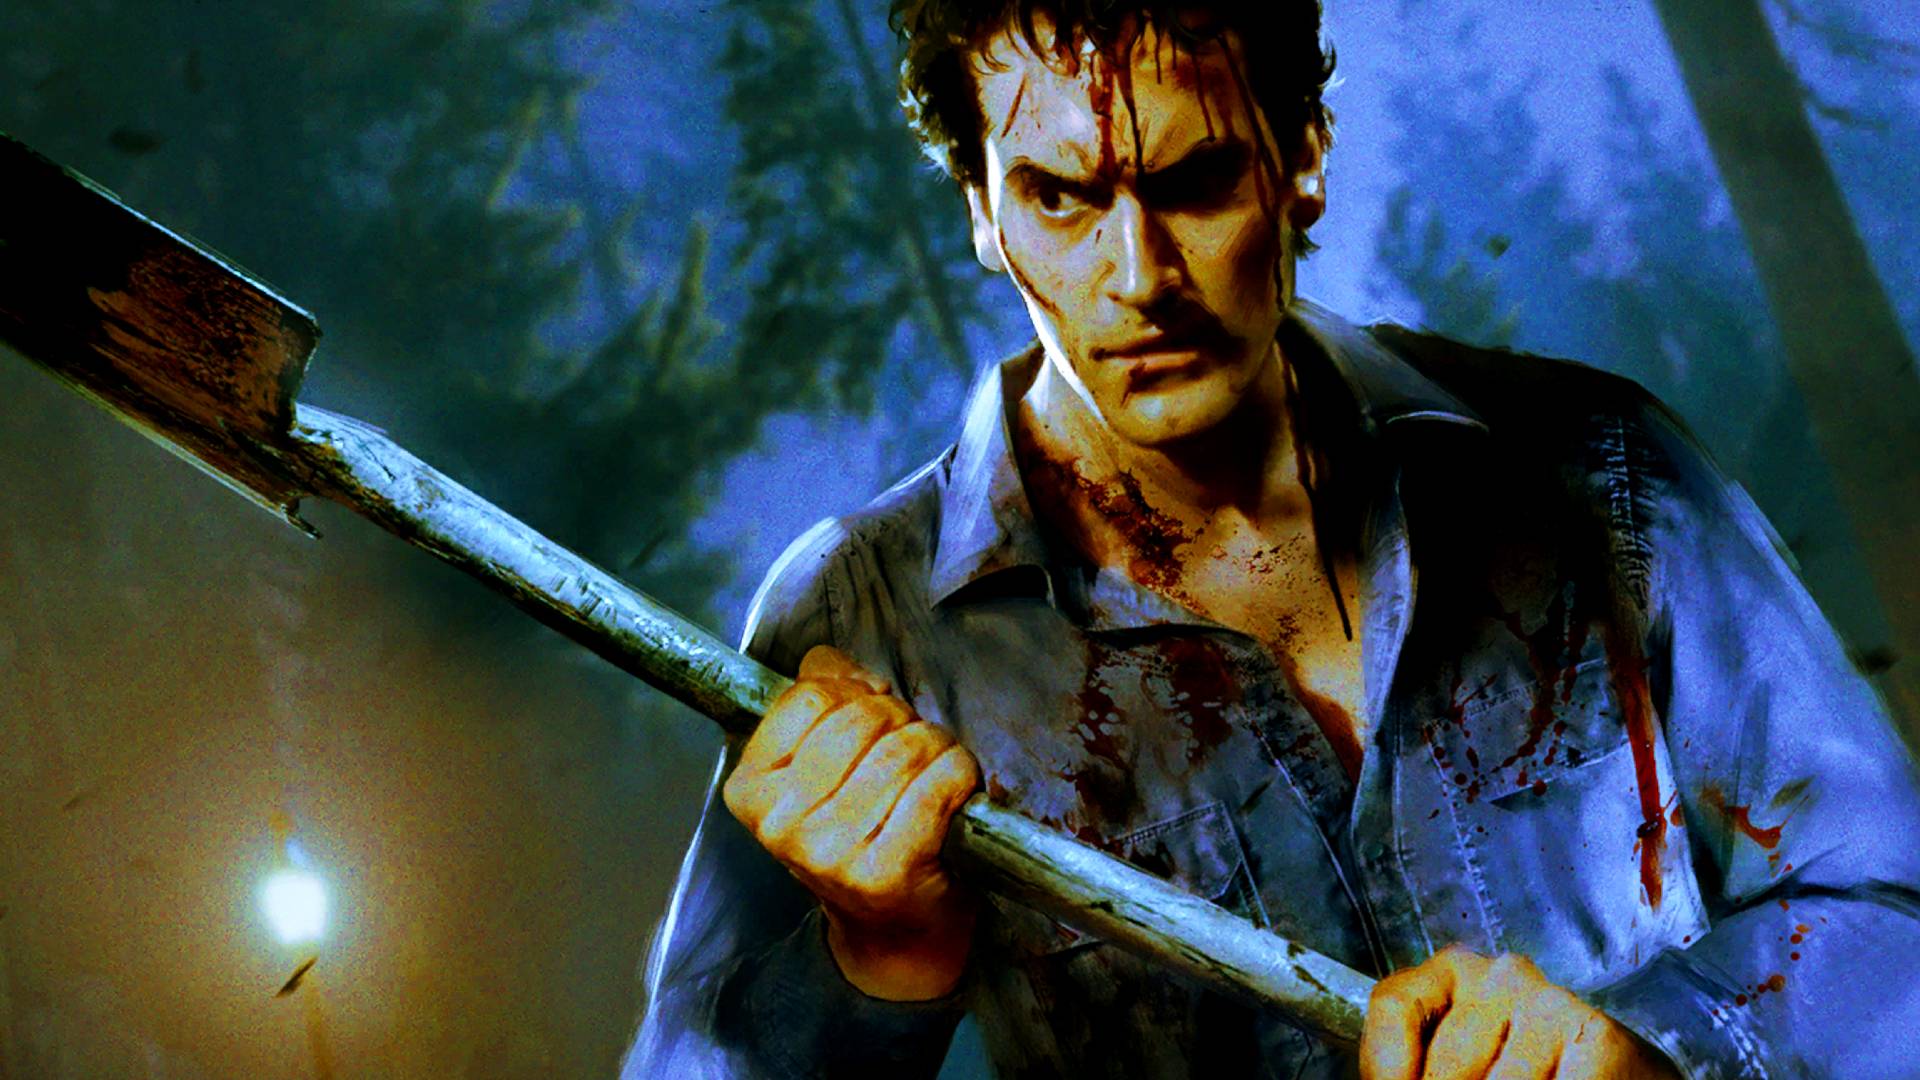 How long is Evil Dead: The Game?